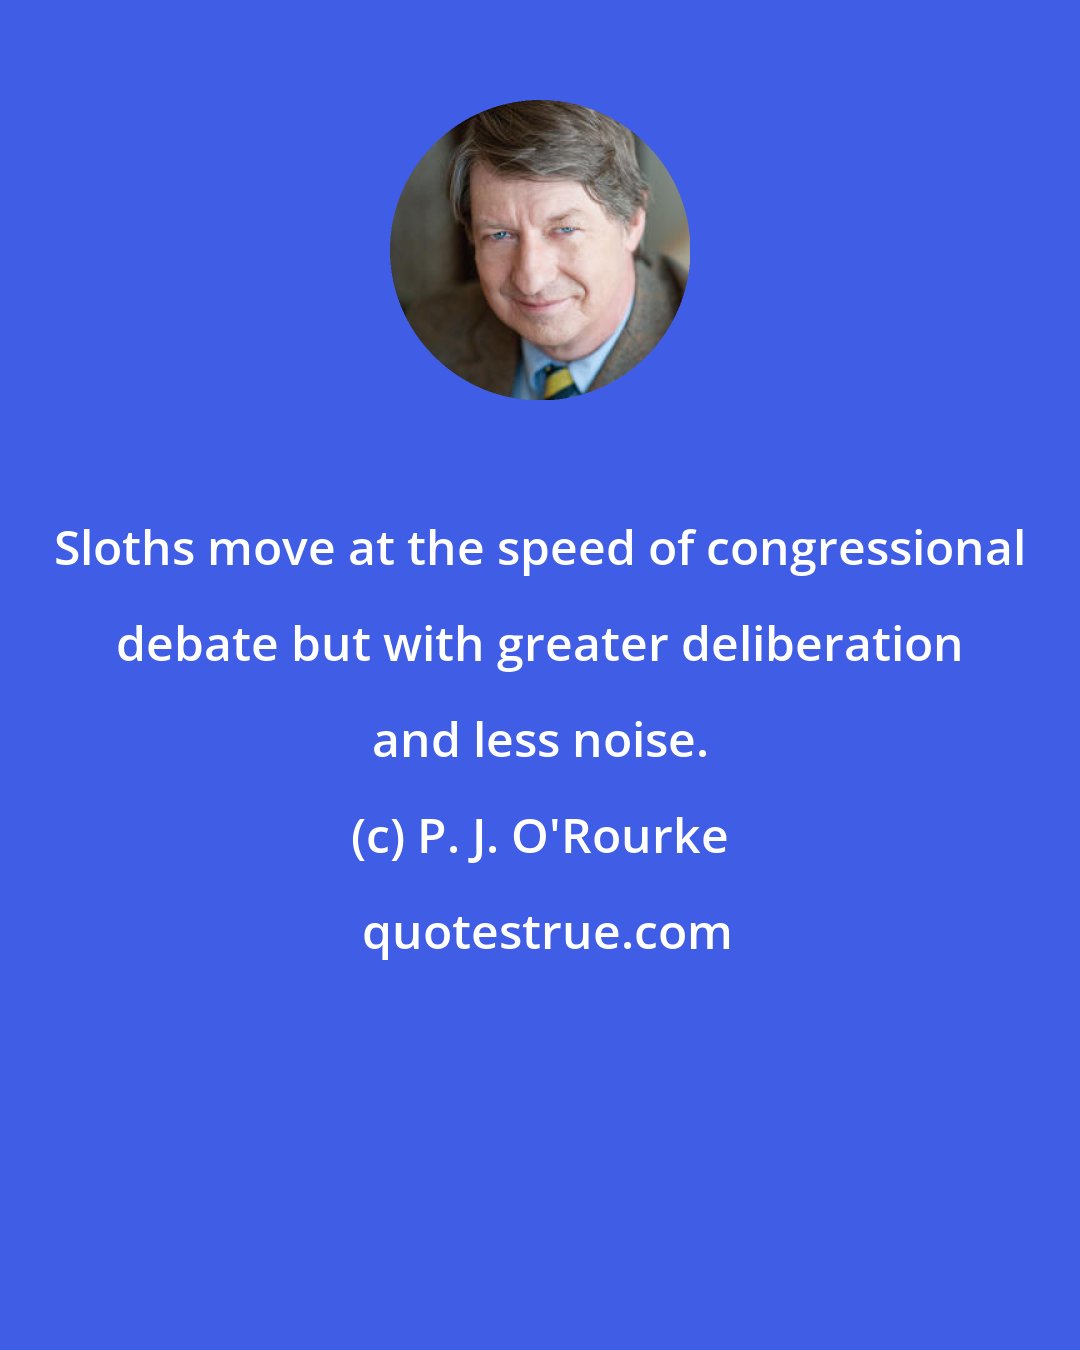 P. J. O'Rourke: Sloths move at the speed of congressional debate but with greater deliberation and less noise.